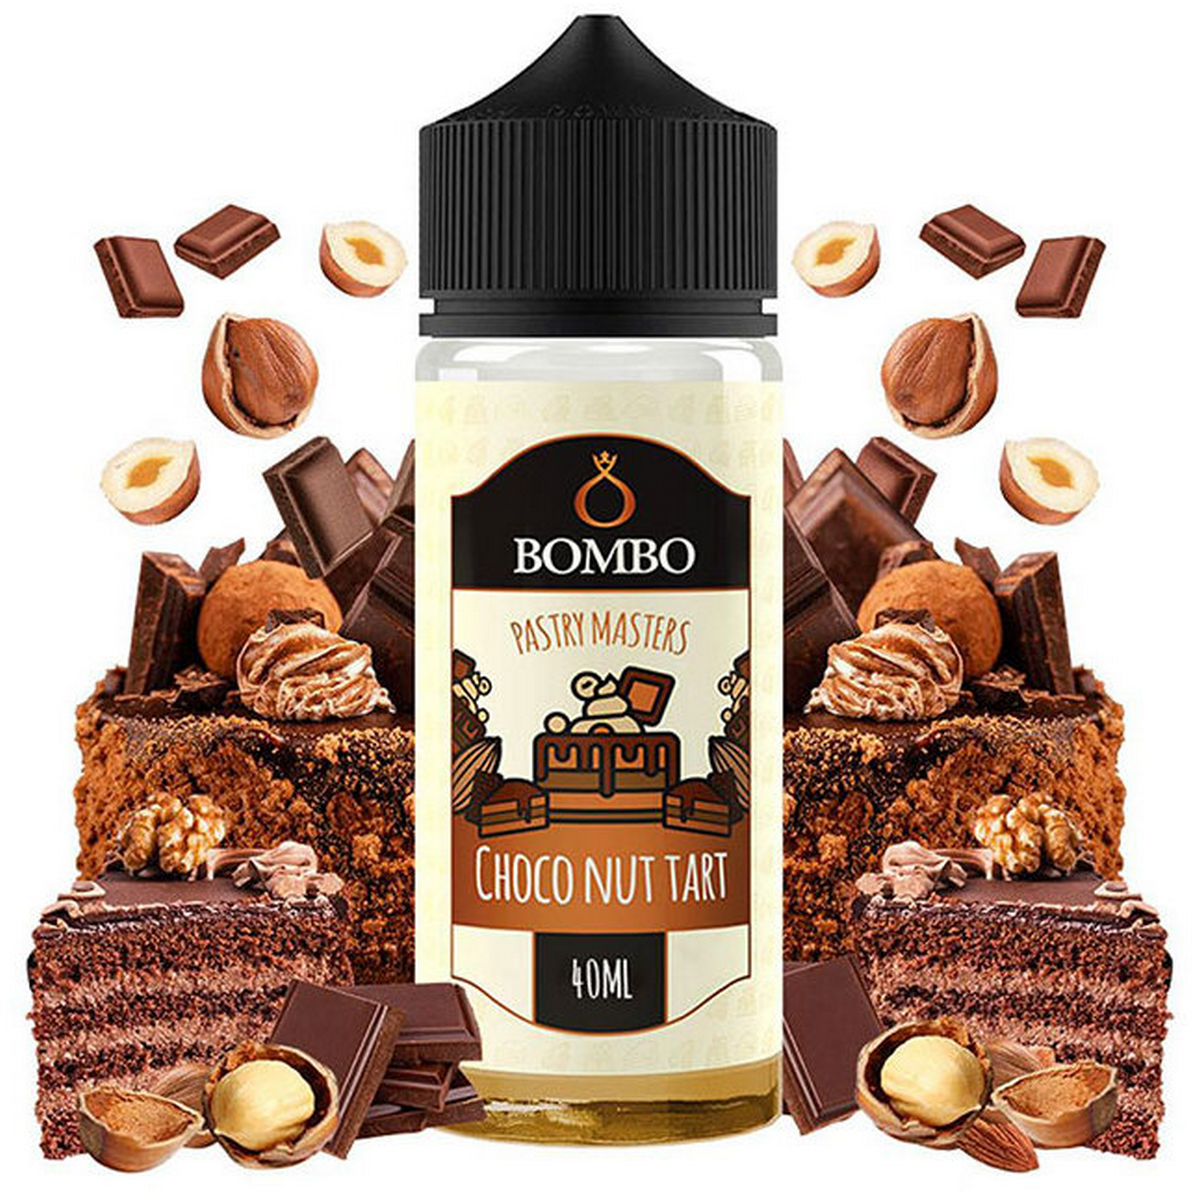 Bombo Pastry Masters Flavor Shot Climax Cream 40ml/120ml